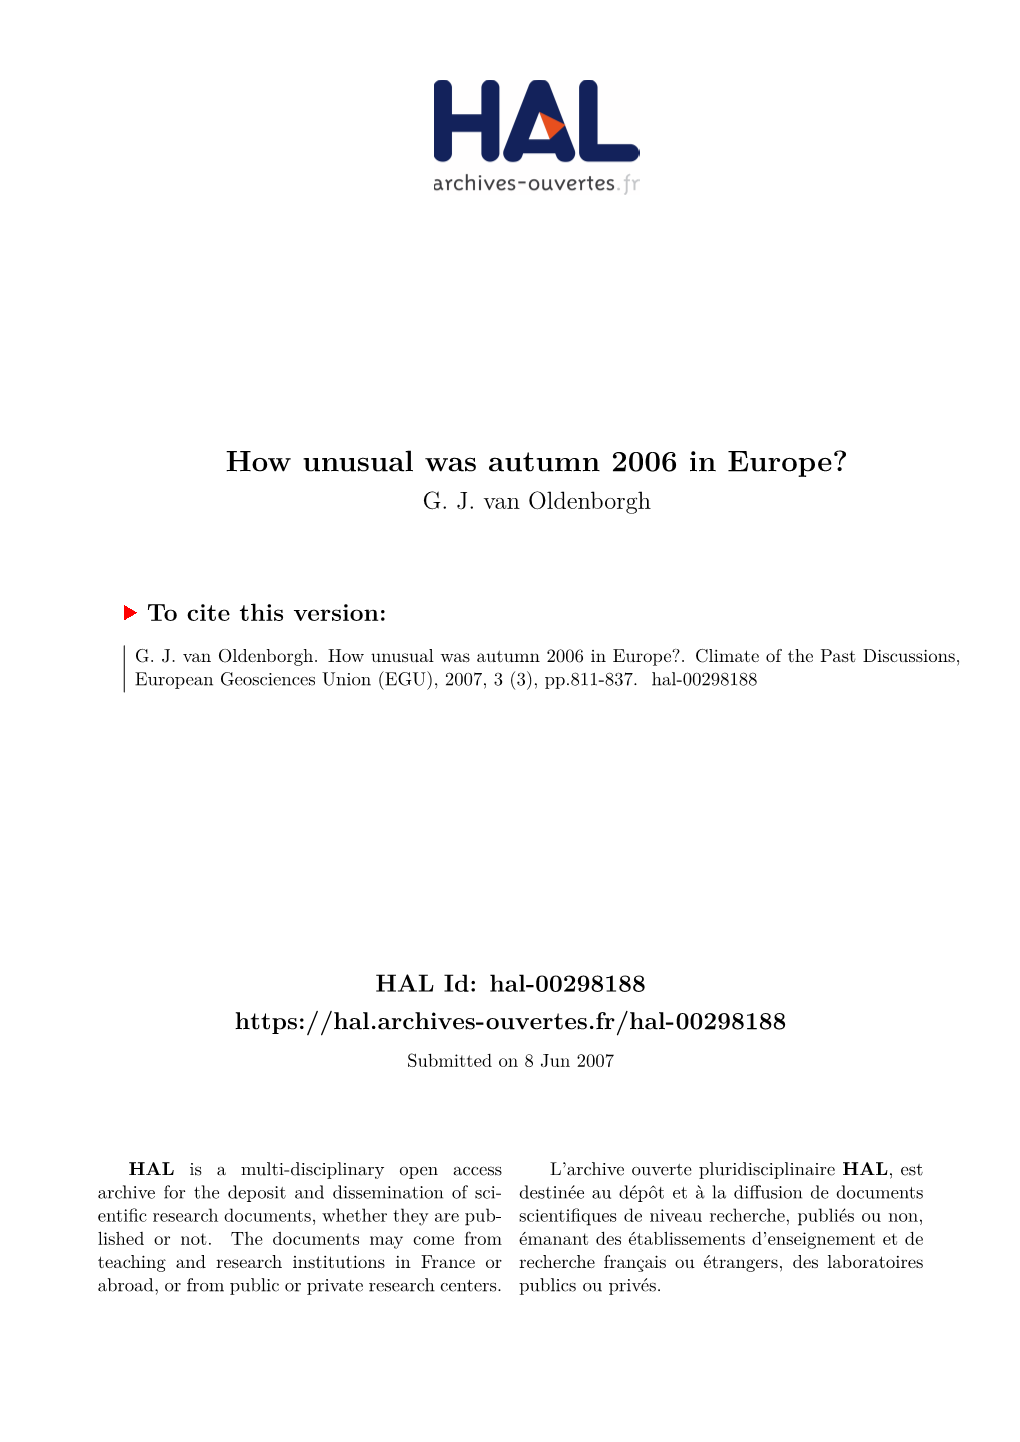 How Unusual Was Autumn 2006 in Europe? G